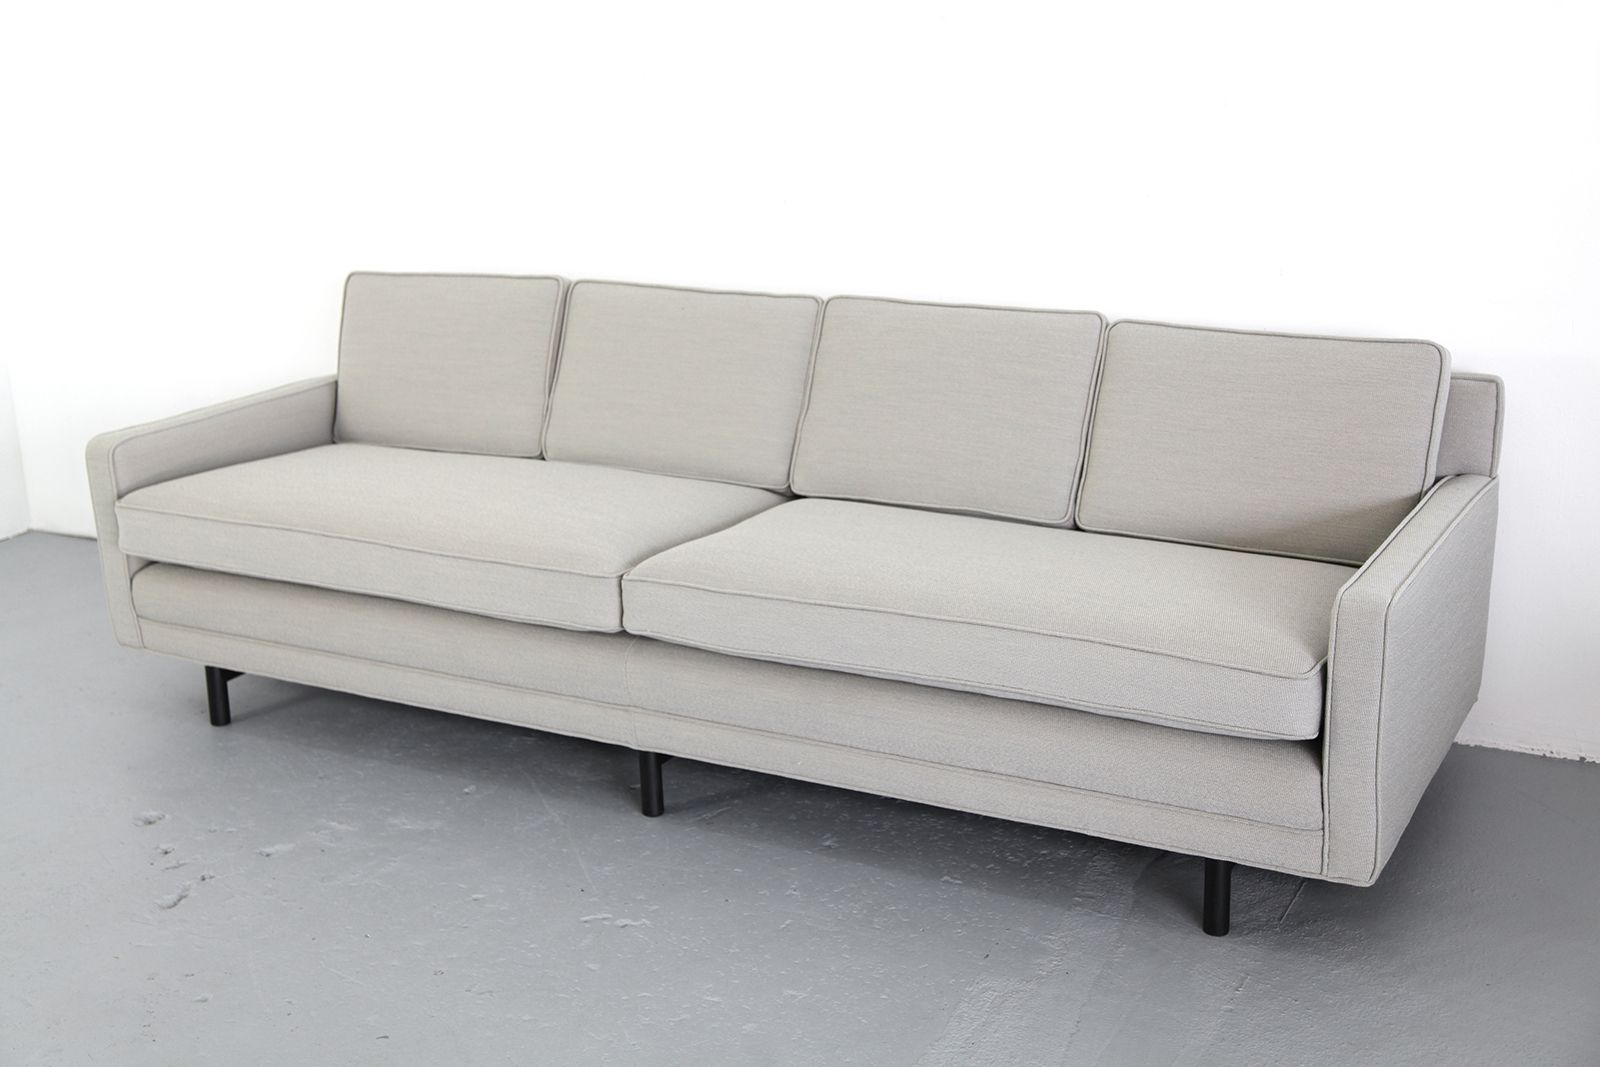 Latest 4 Seater Sofapaul Mccobb For Directional For Sale At Pamono With Regard To Four Seater Sofas (View 1 of 20)